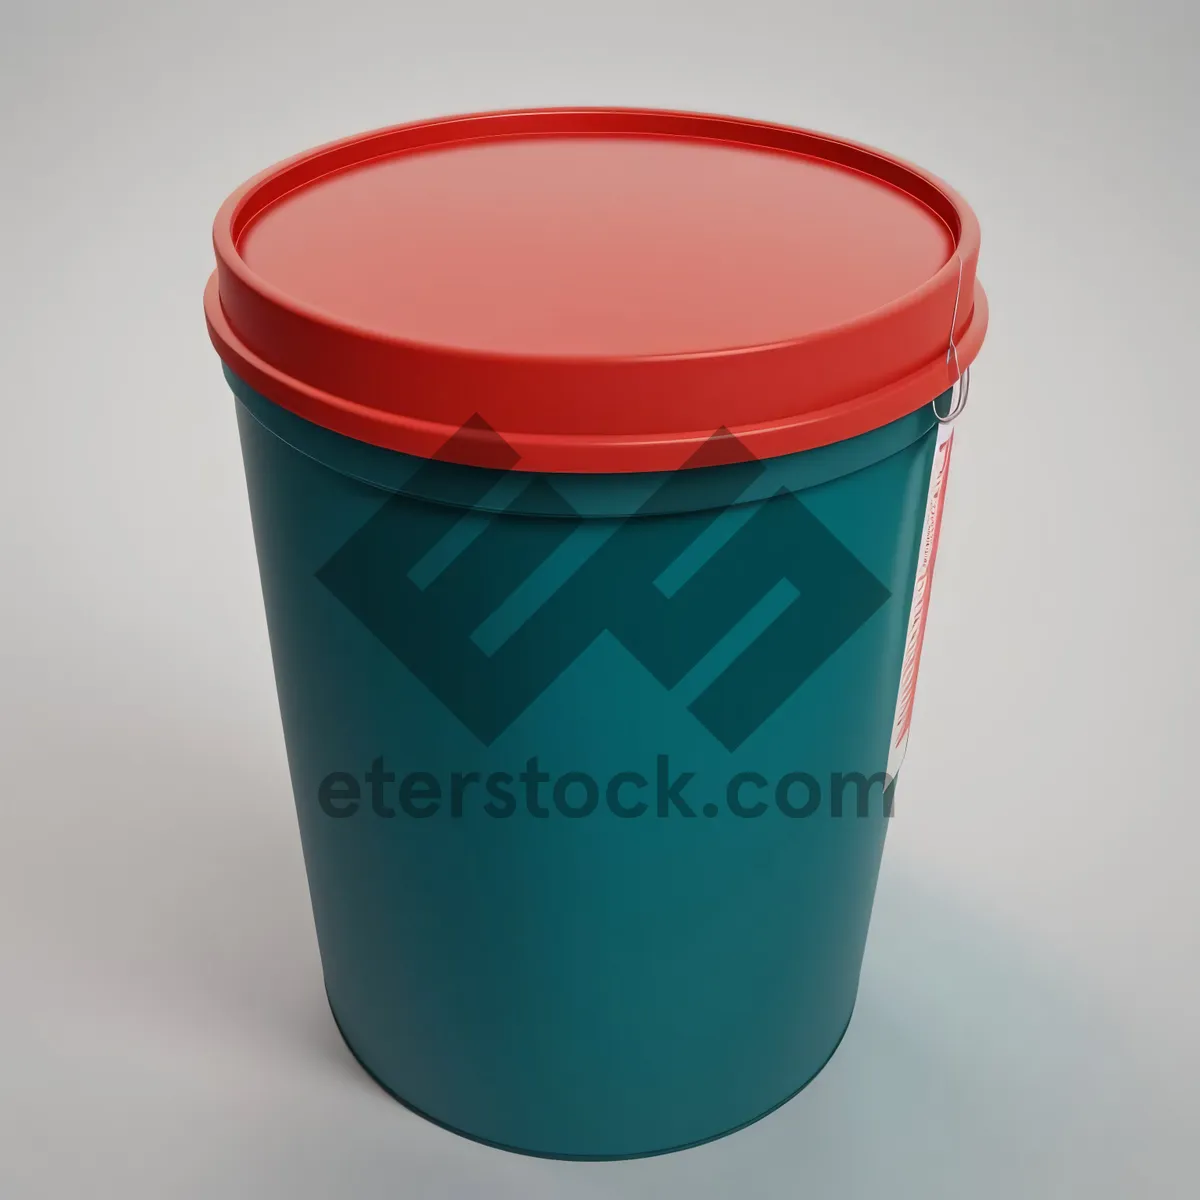 Picture of Empty Plastic Cup - Beverage Container Image